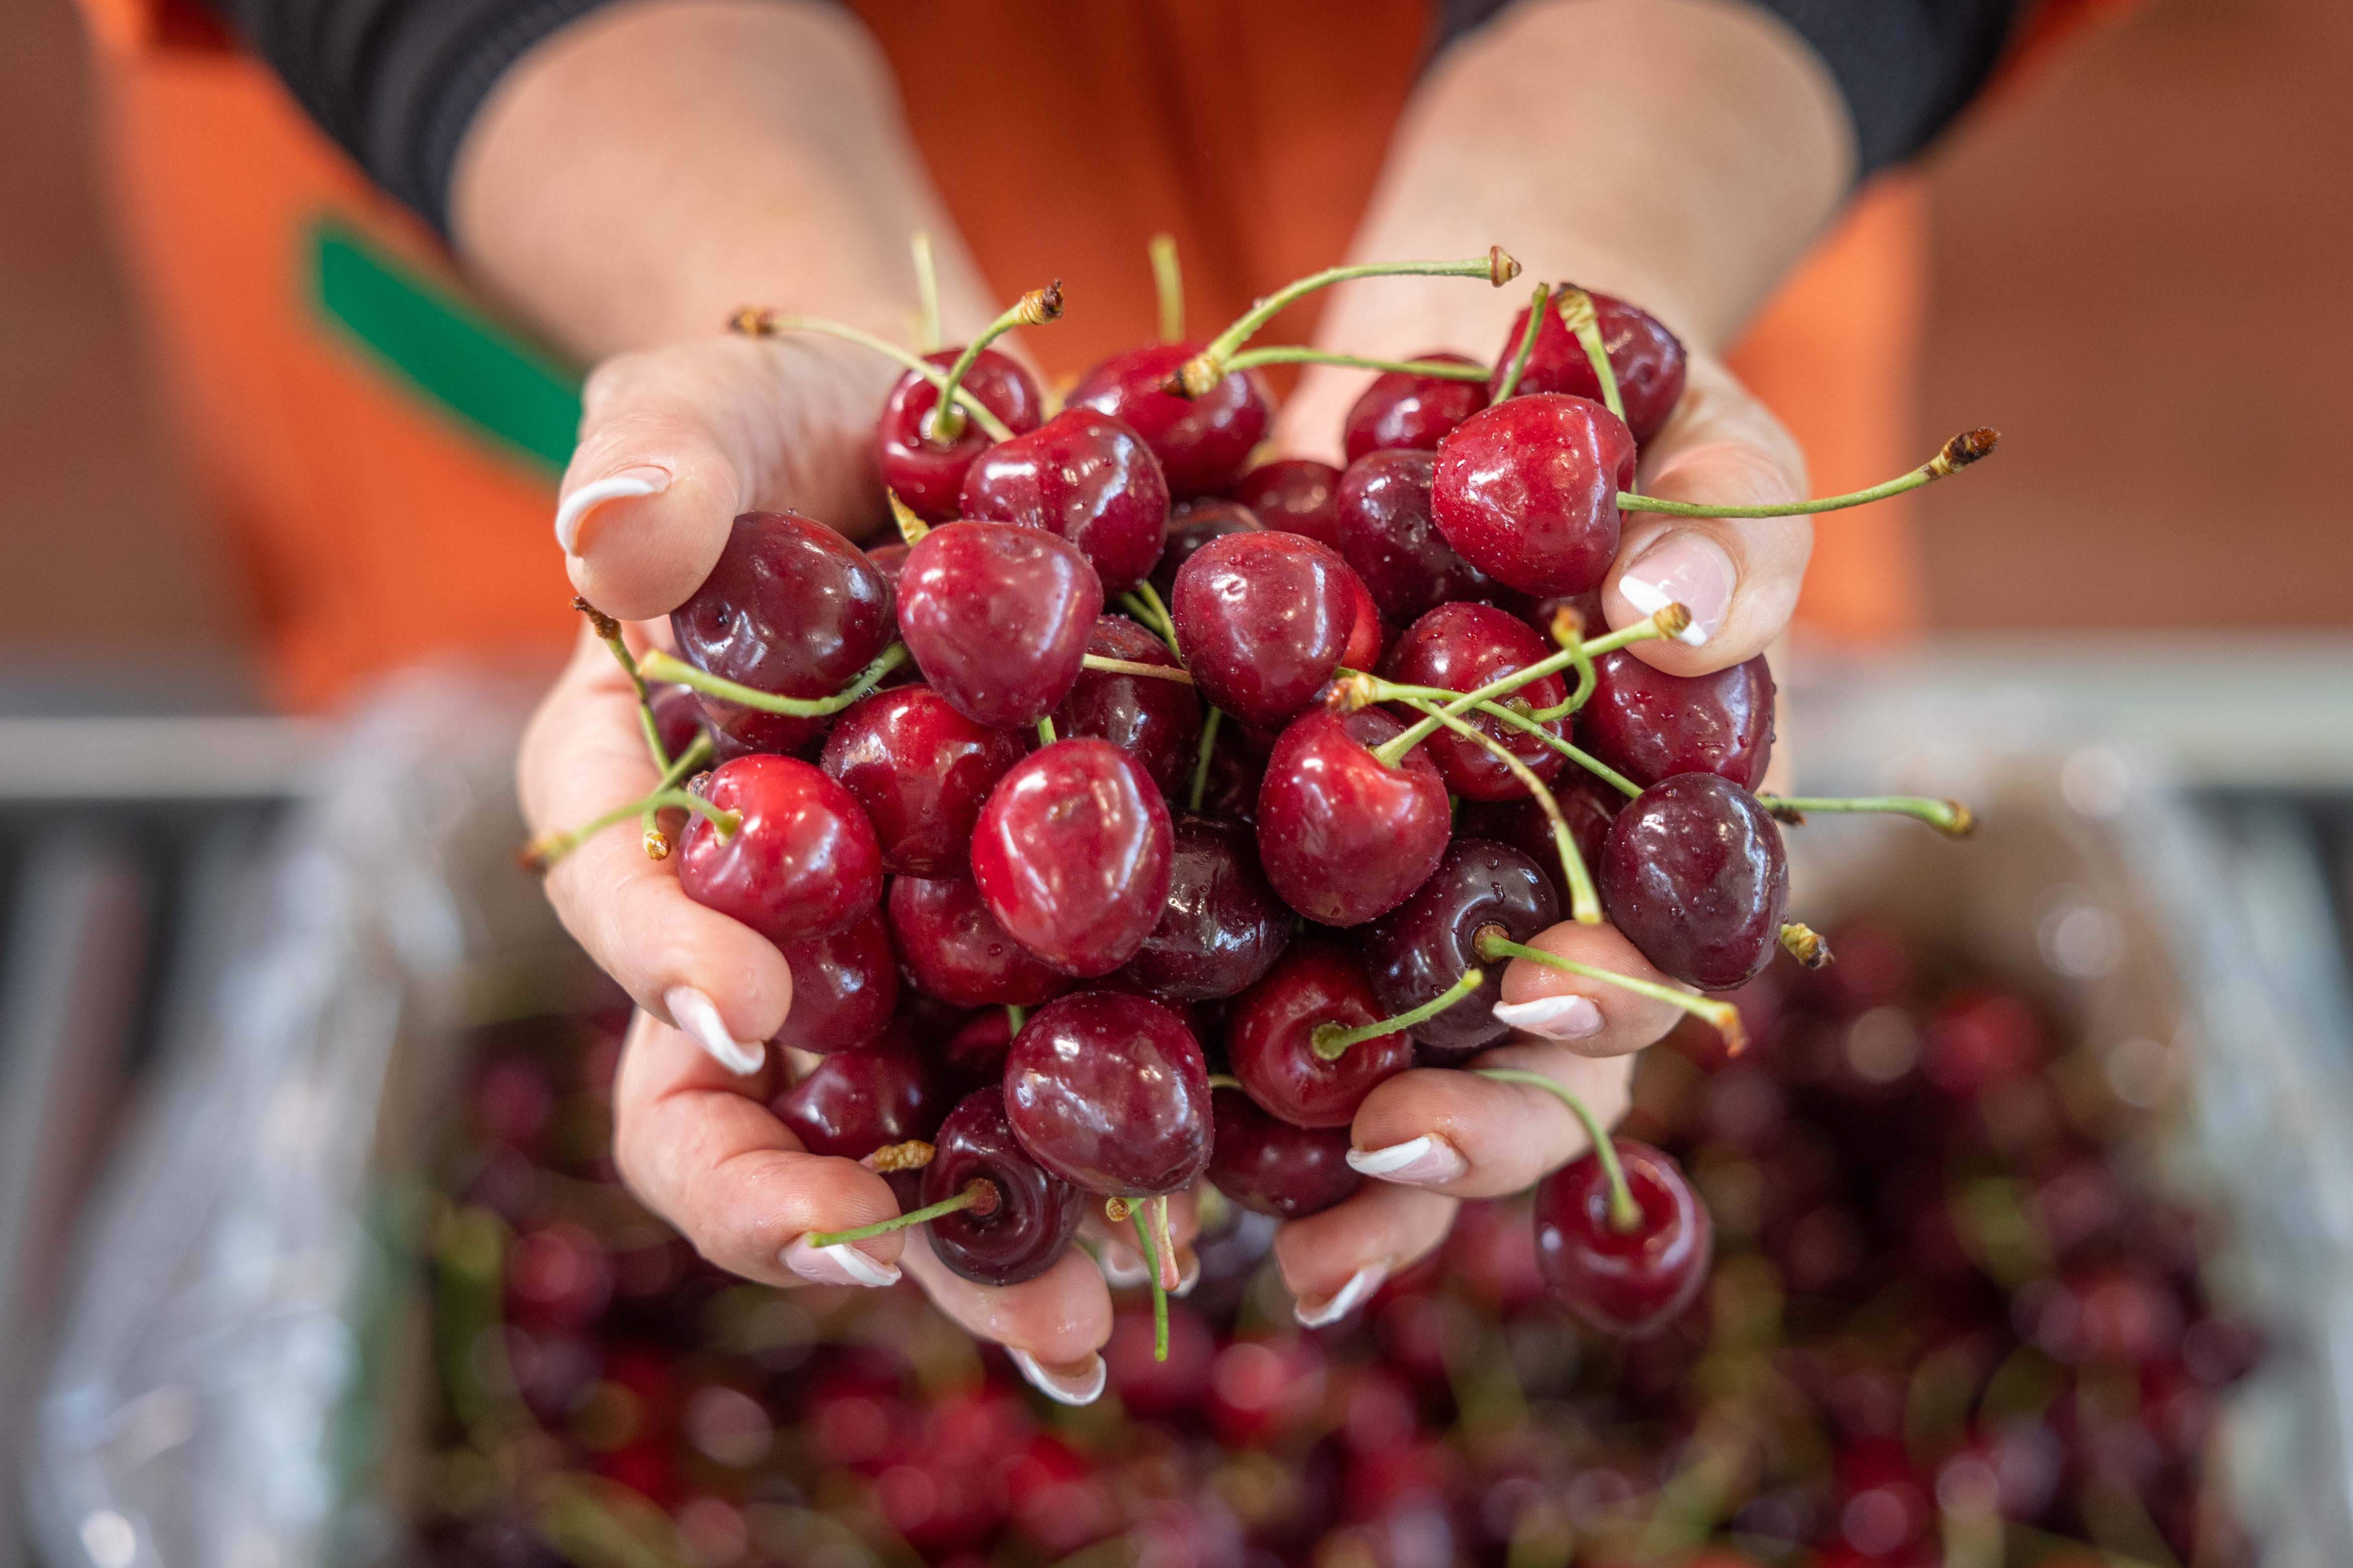 How end-to-end line solutions for cherry packhouses are improving efficiencies and profitability